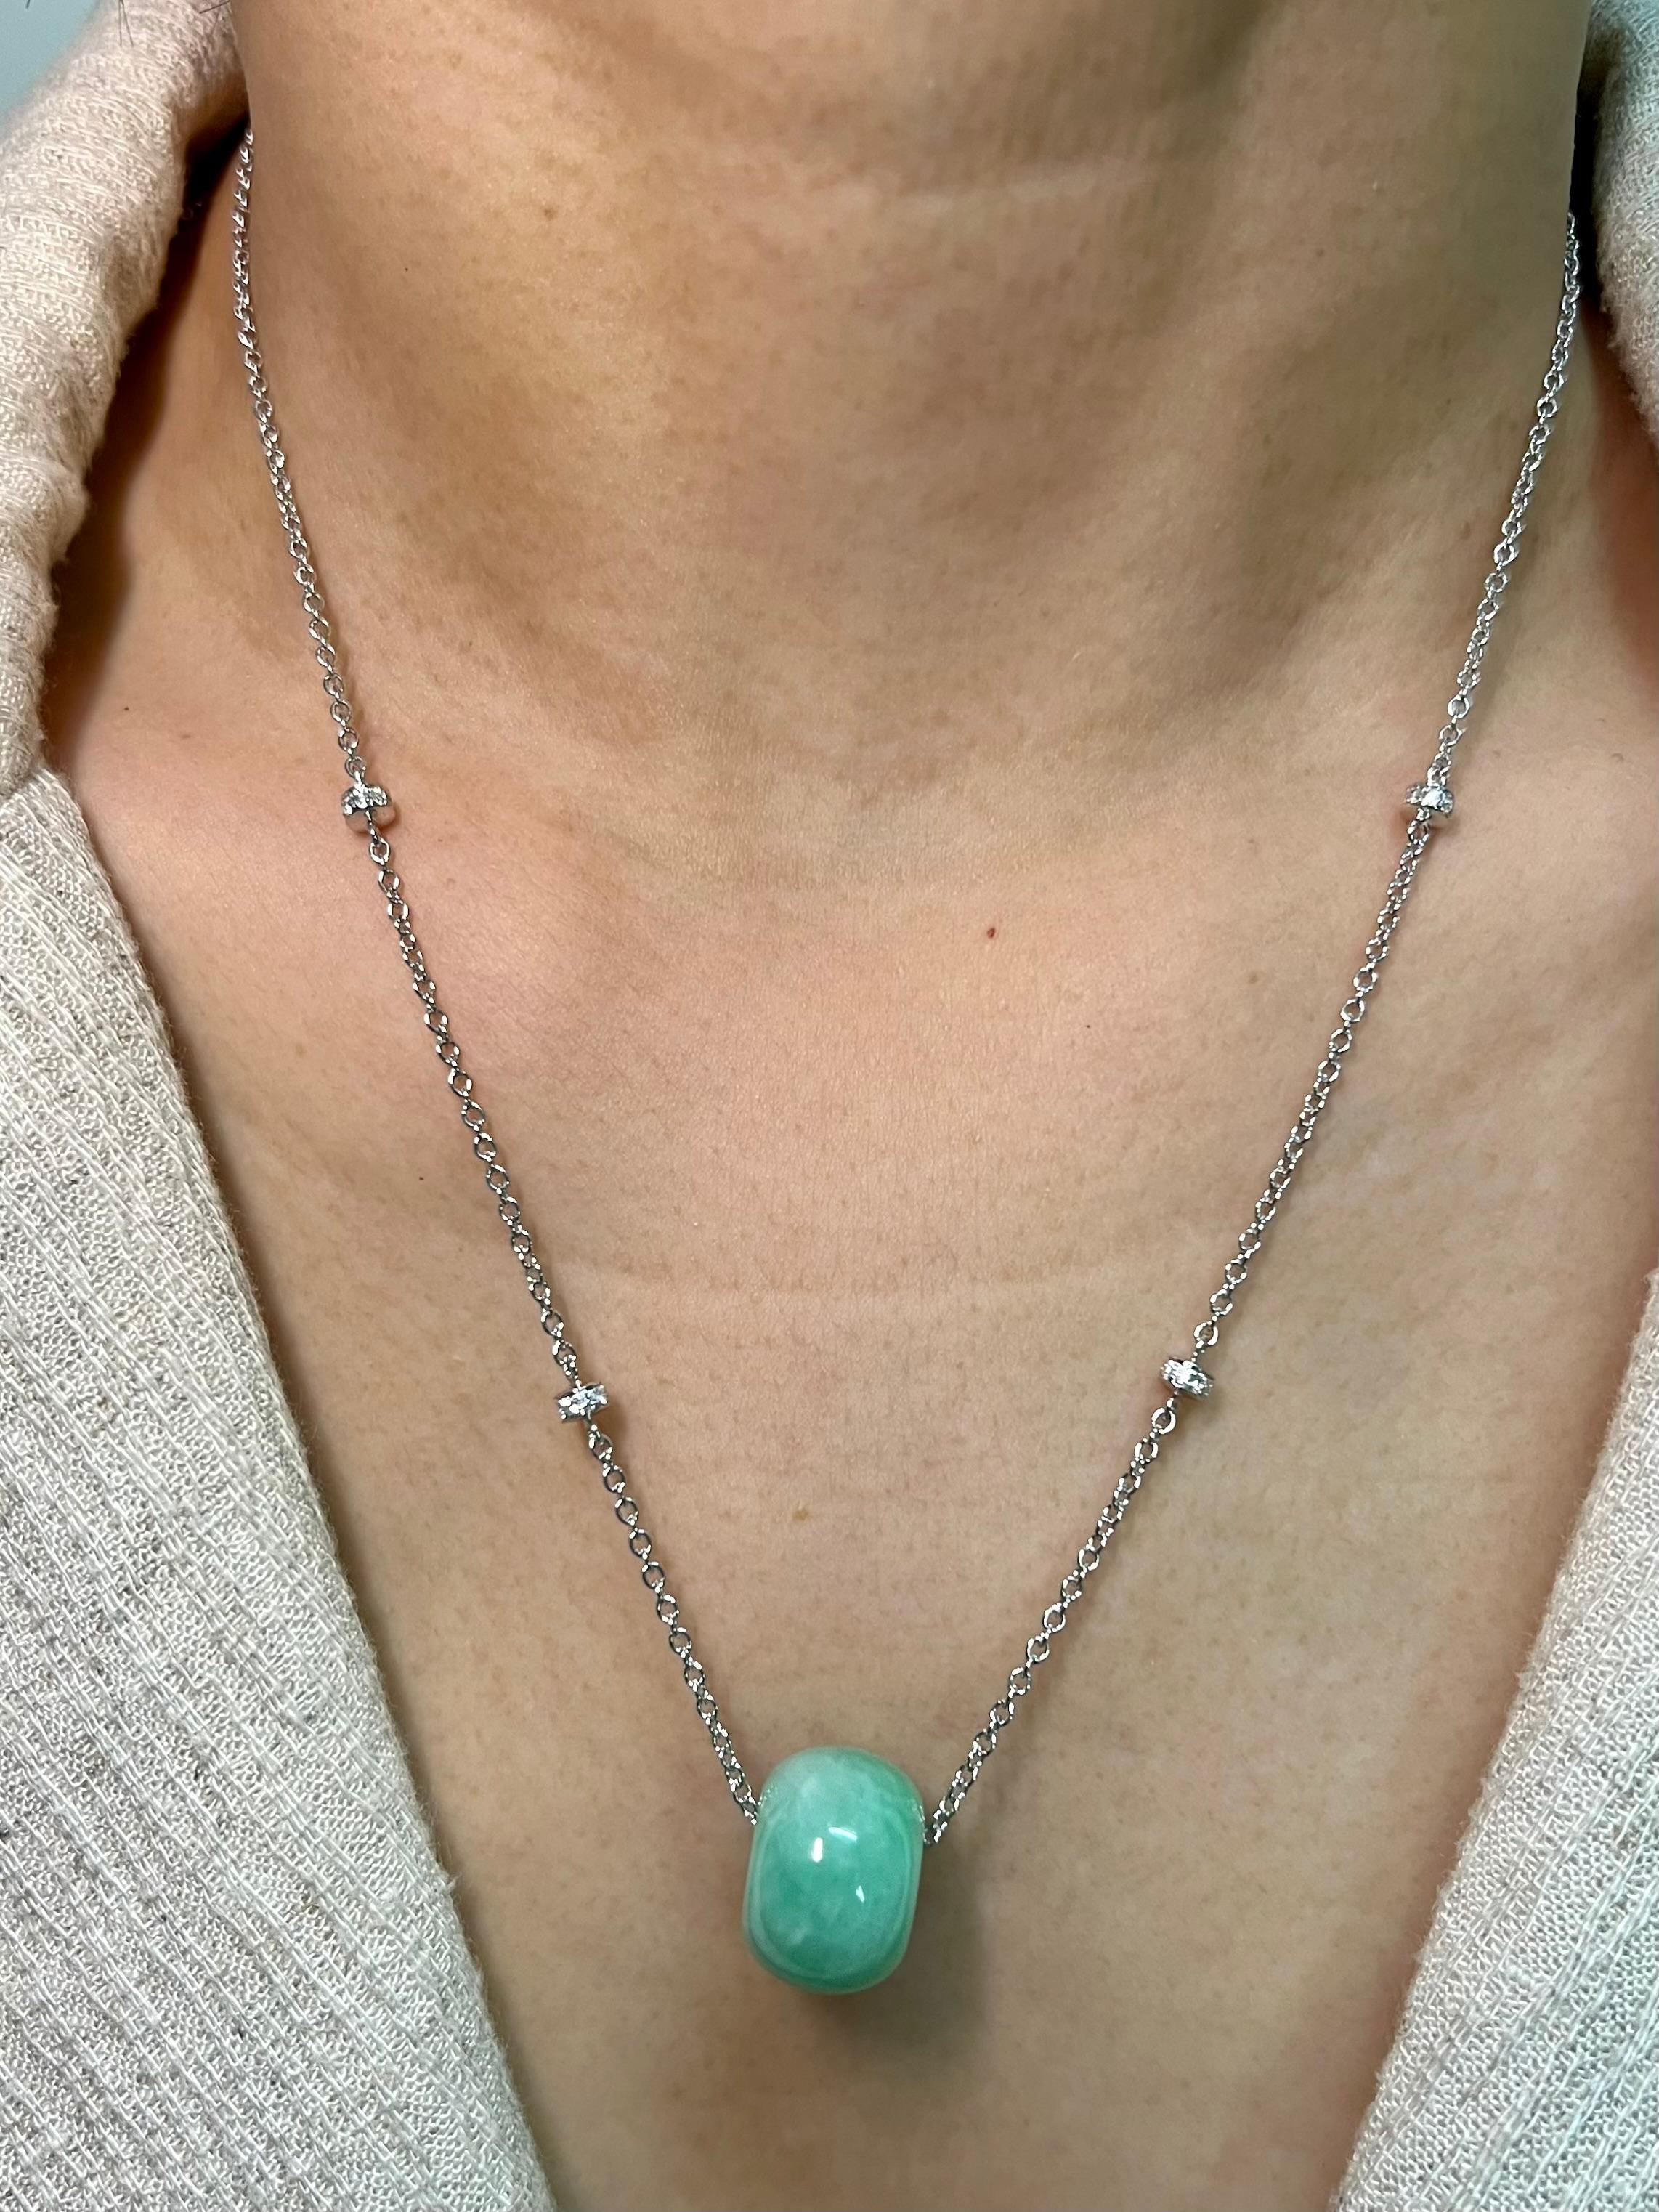 Please check out the HD video! Here is a nice Jade donut pendant with a custom diamond necklace. The jade's outer diameter is almost 16mm. The adjustable 16 and 18 inch necklace is set in 18k white gold and diamonds. There are 32 white diamonds